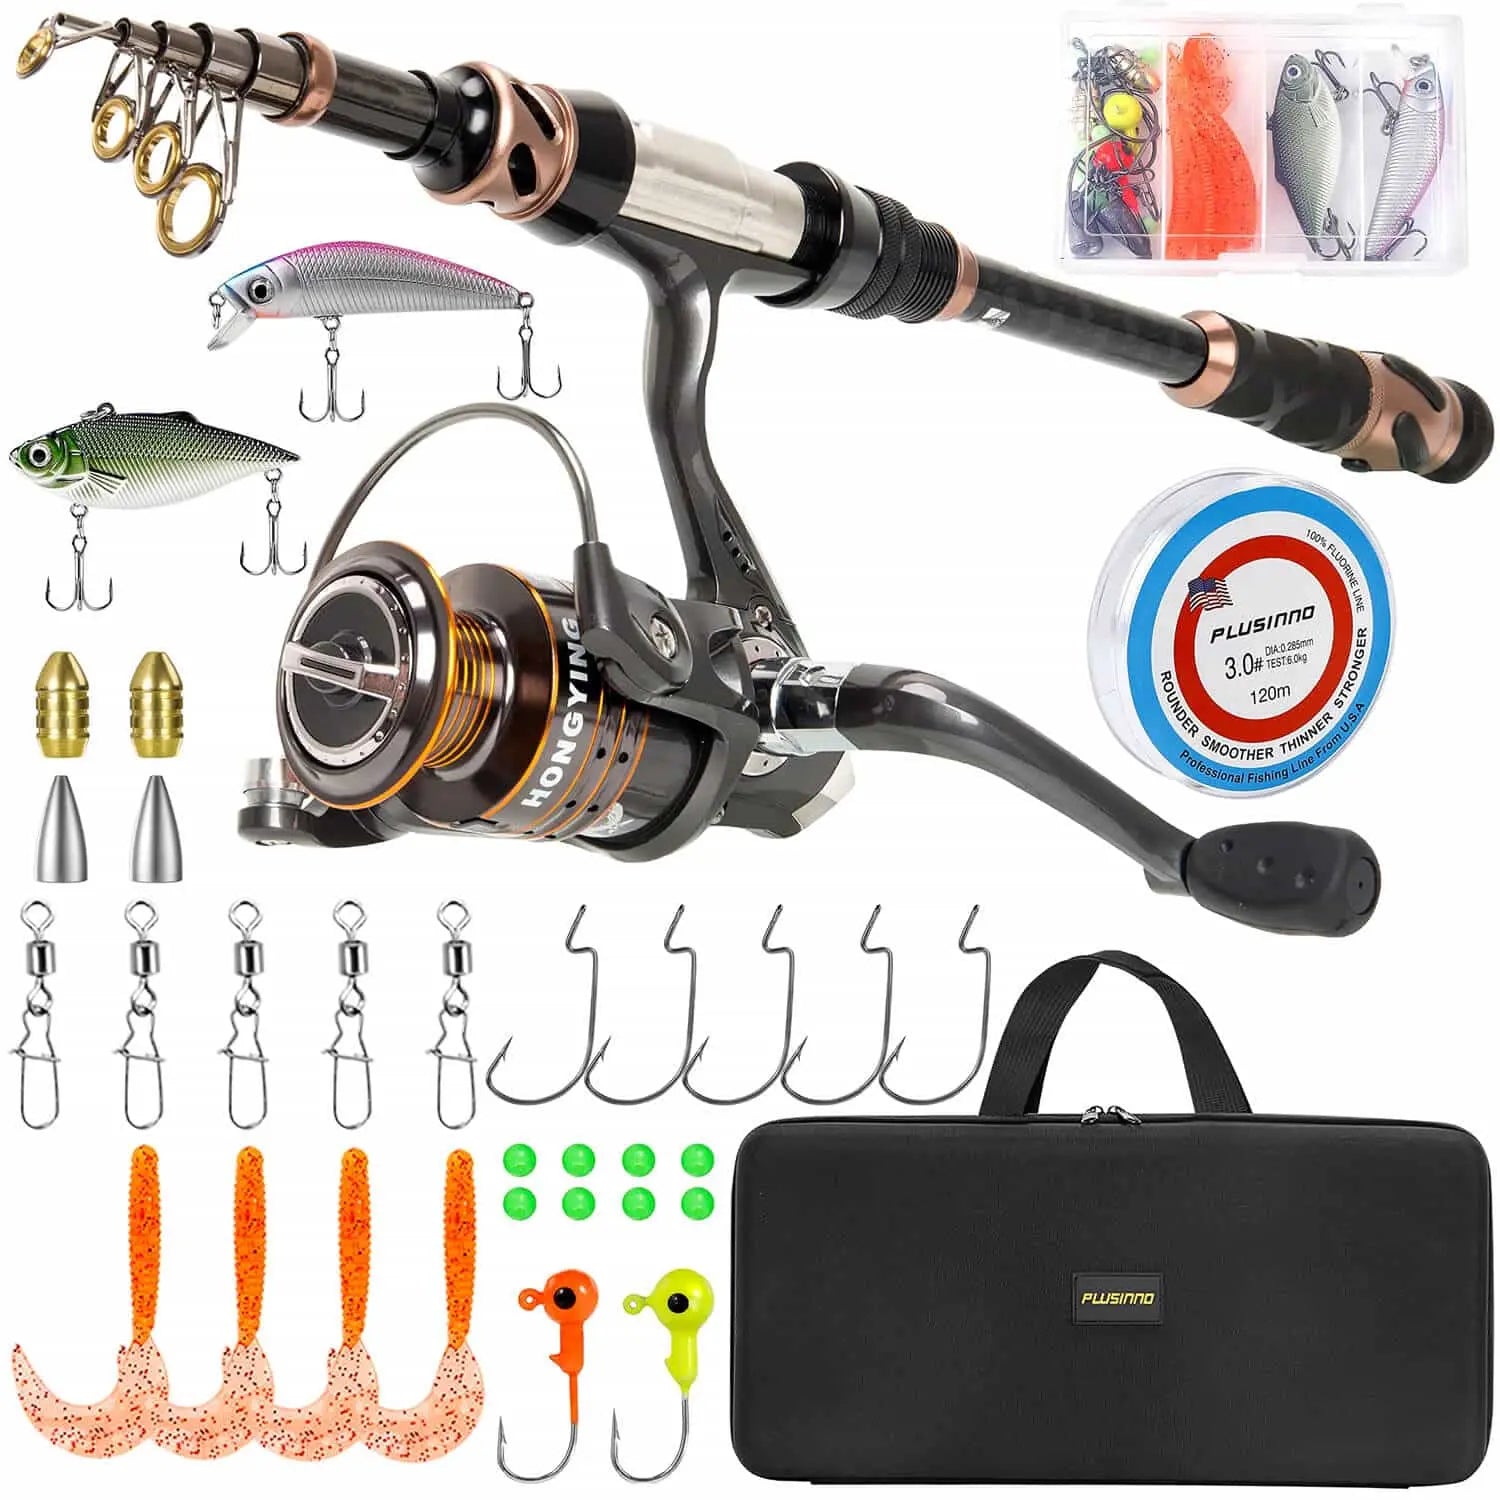 Plusinno Kids Telescopic Fishing Rod and Reel Combo Kit with